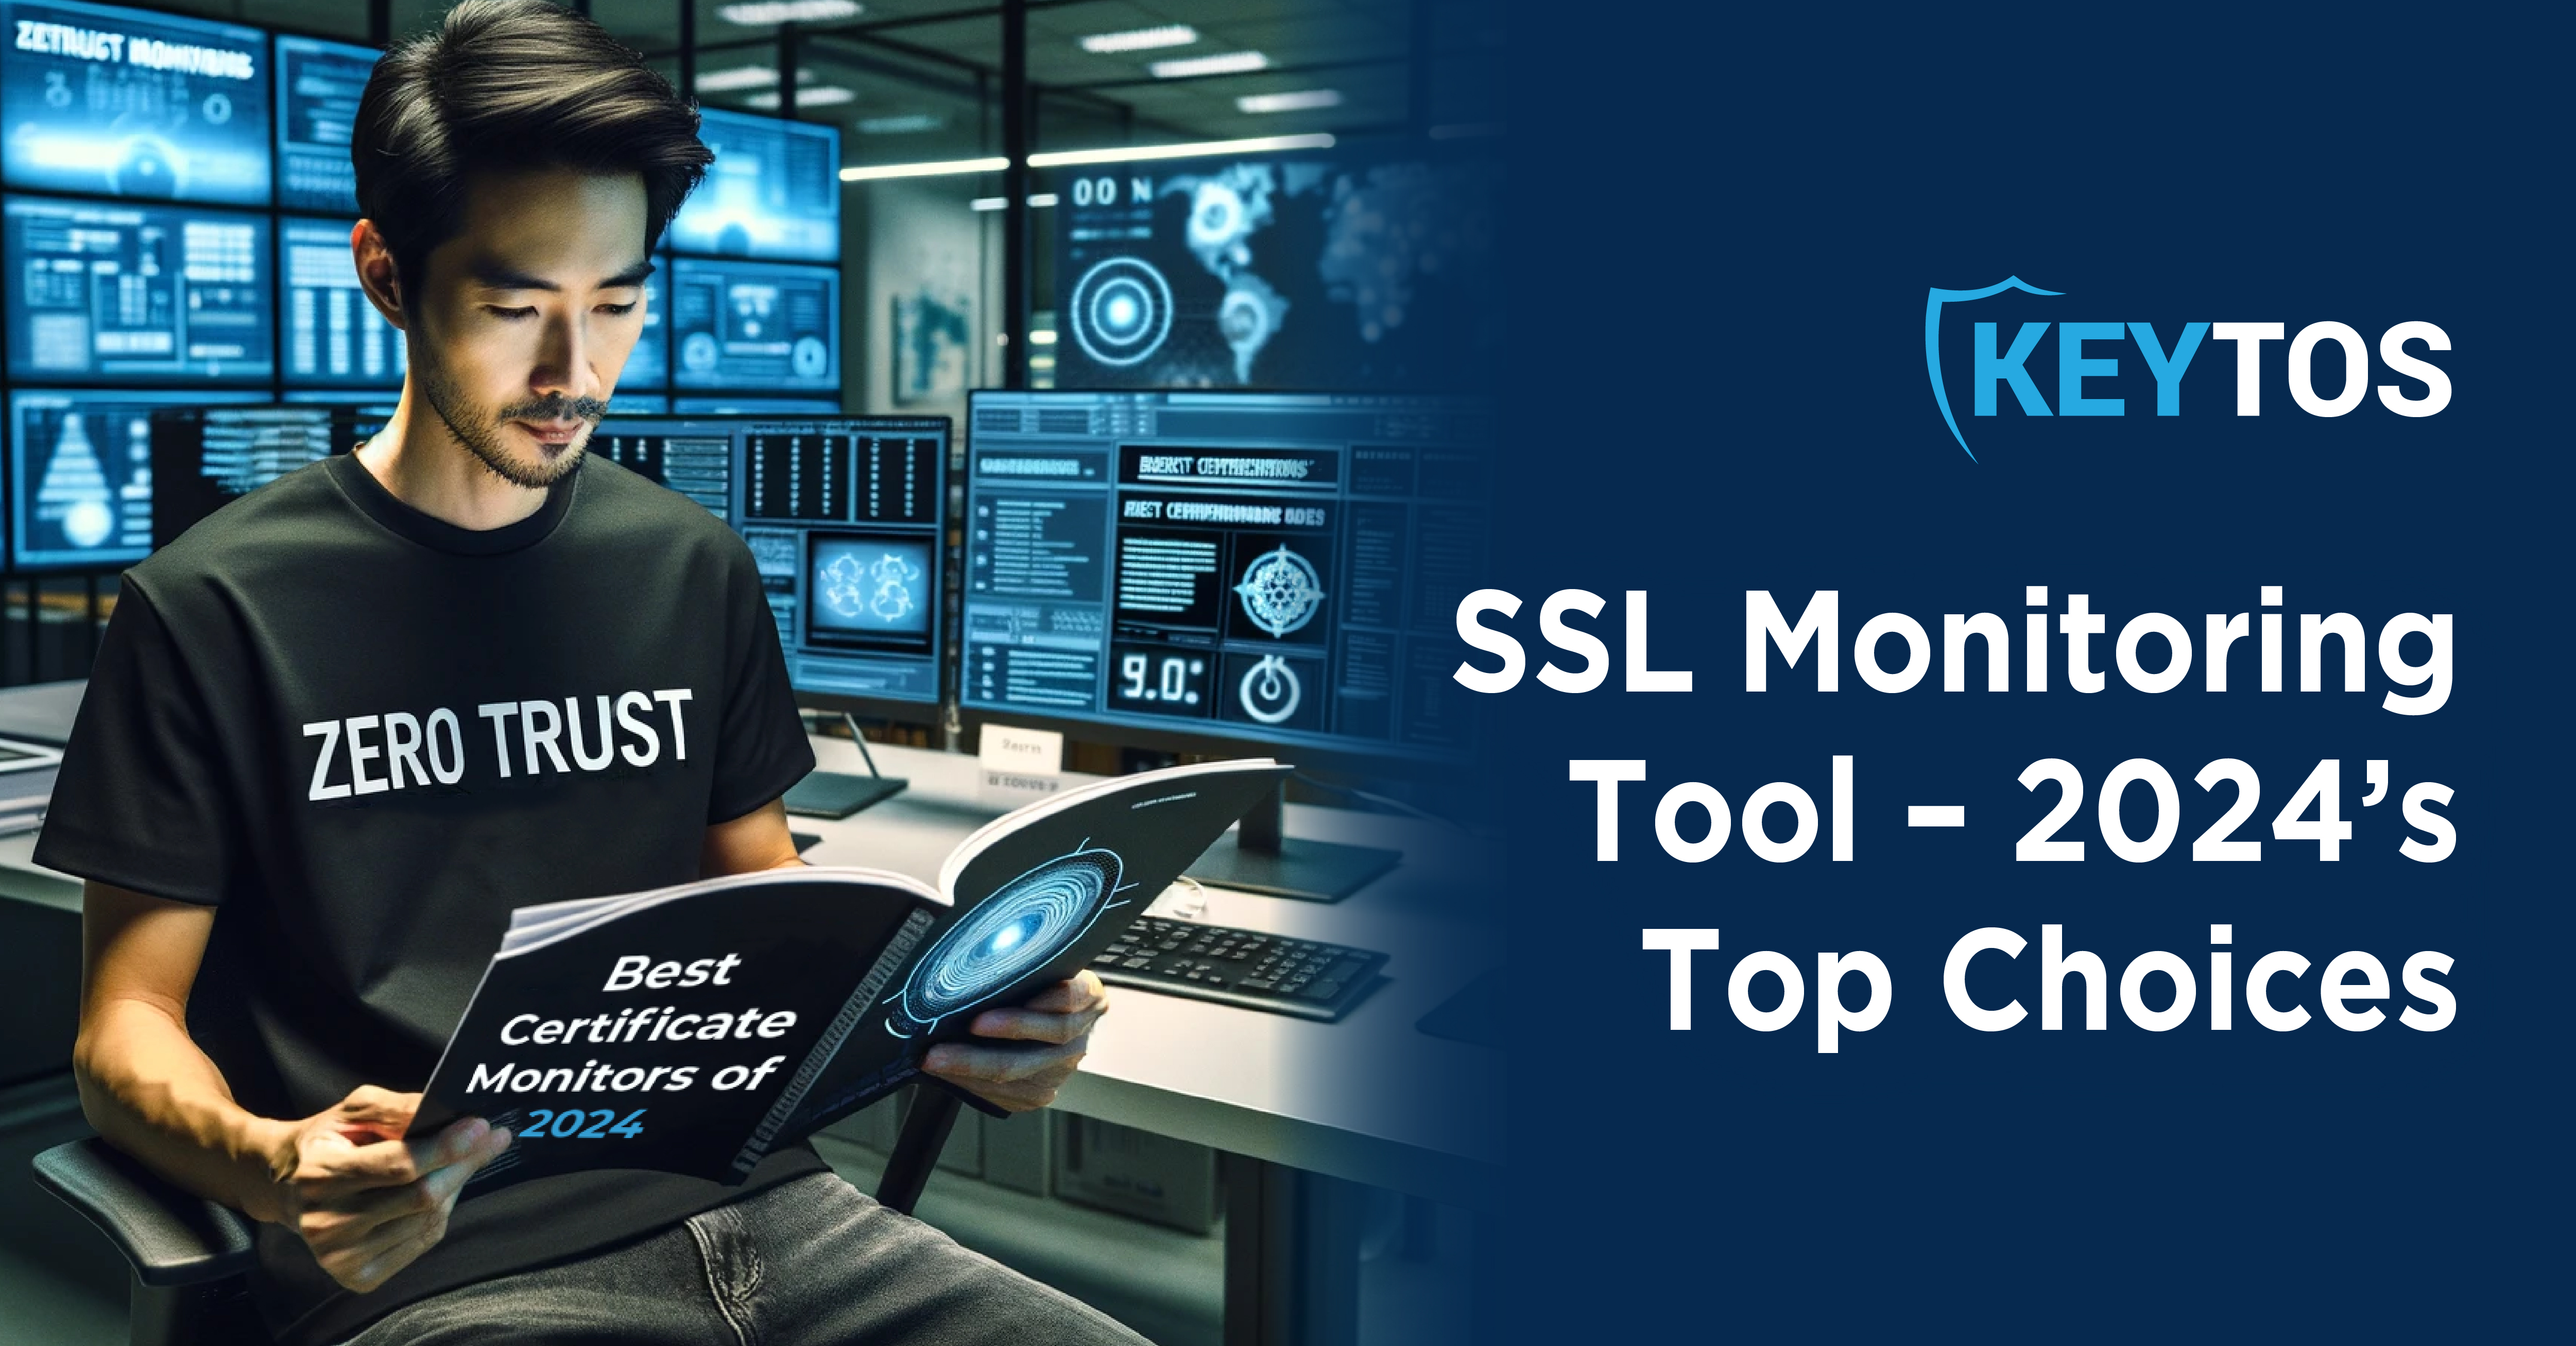 What are the Best SSL Certificate Monitoring Tools?